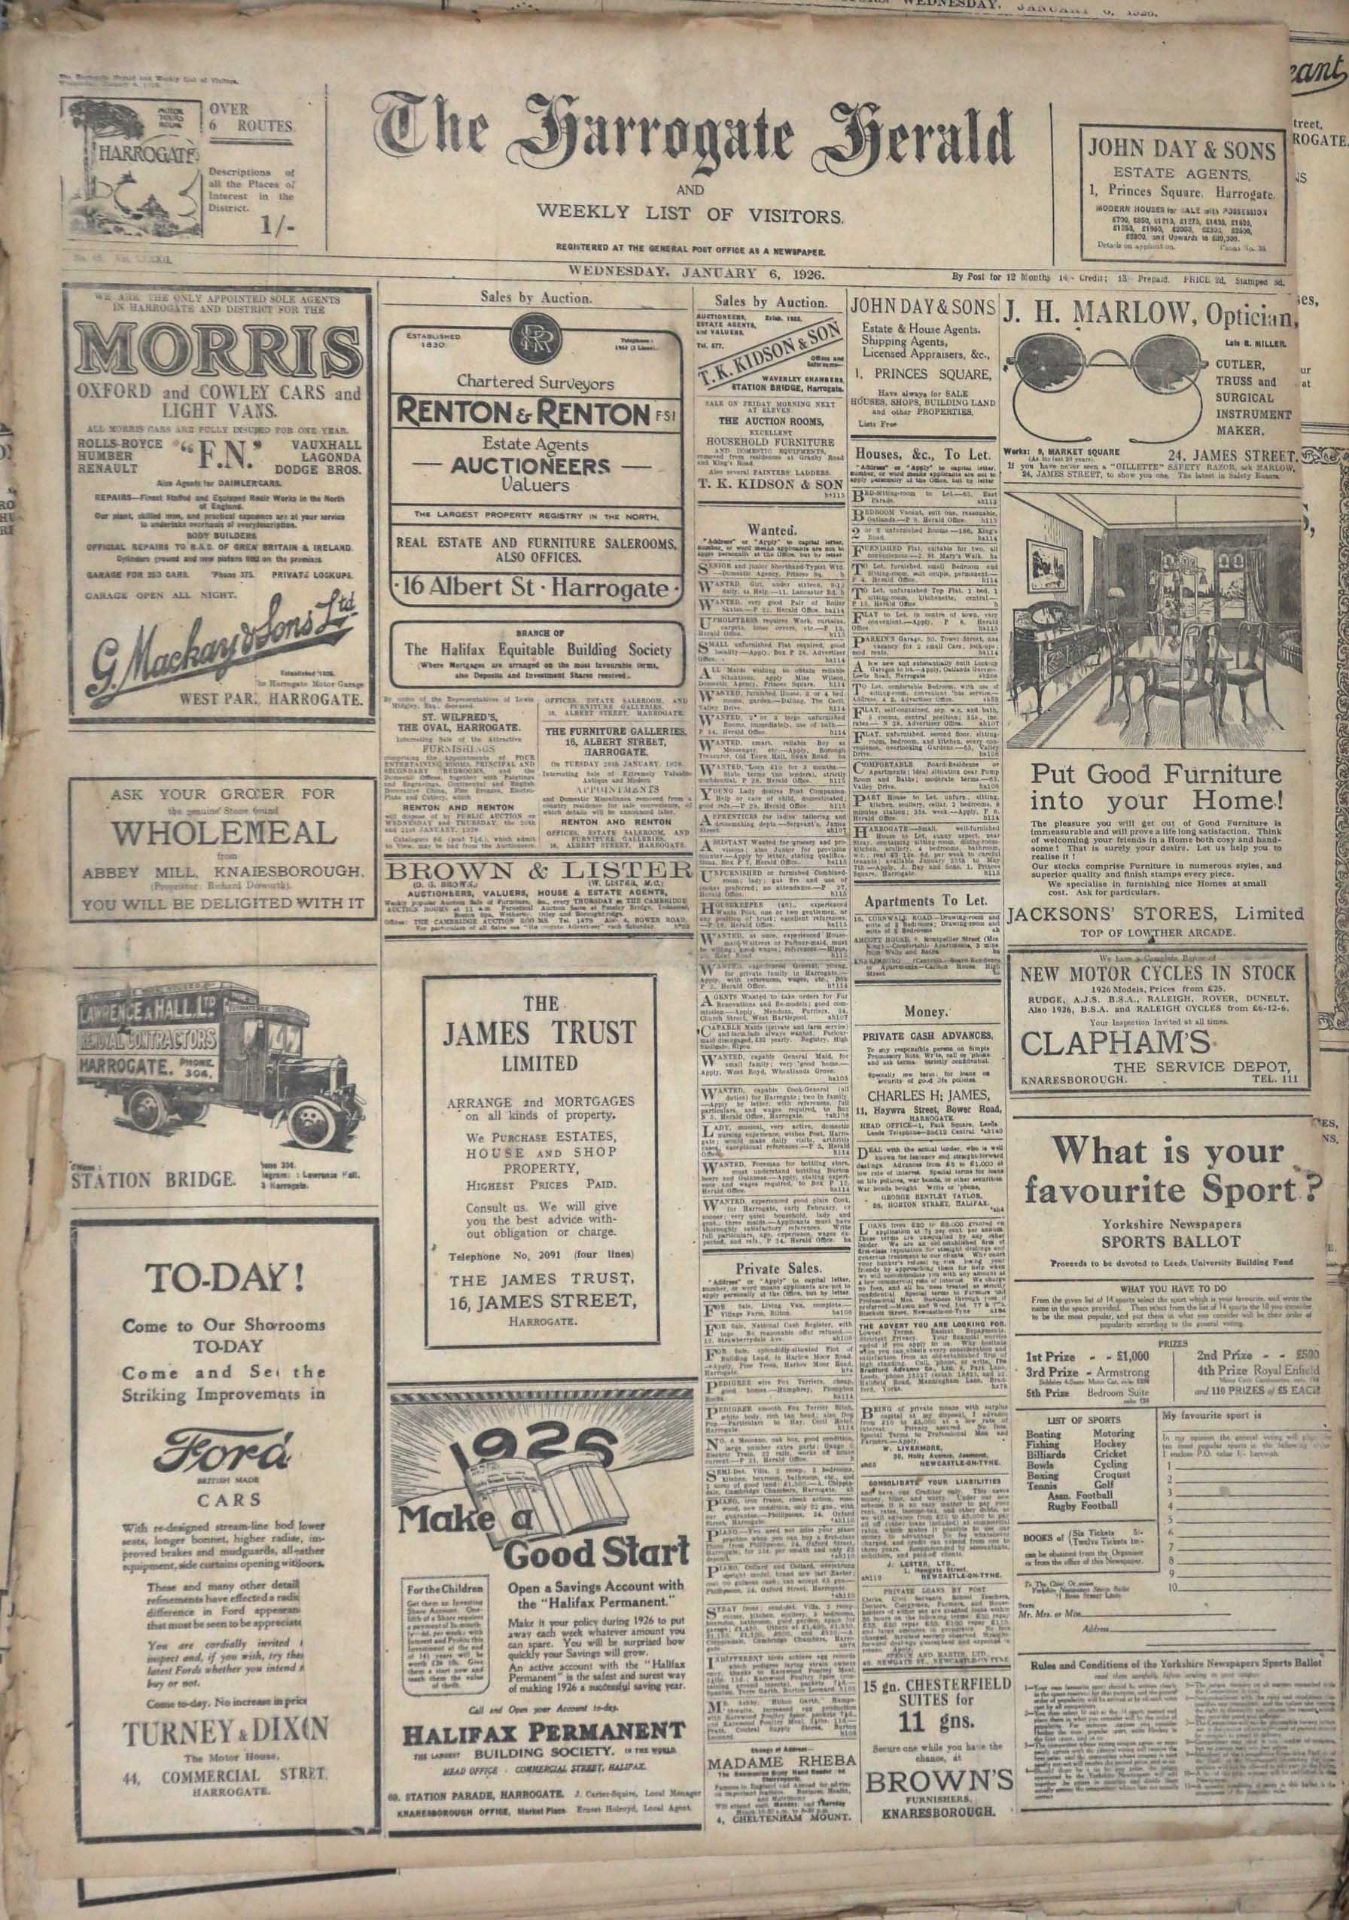 The Harrogate Herald and Weekly List of Visitors No 45 vol LXII - Wed Jan 6th 1926 to Dec 29th - - Image 2 of 9